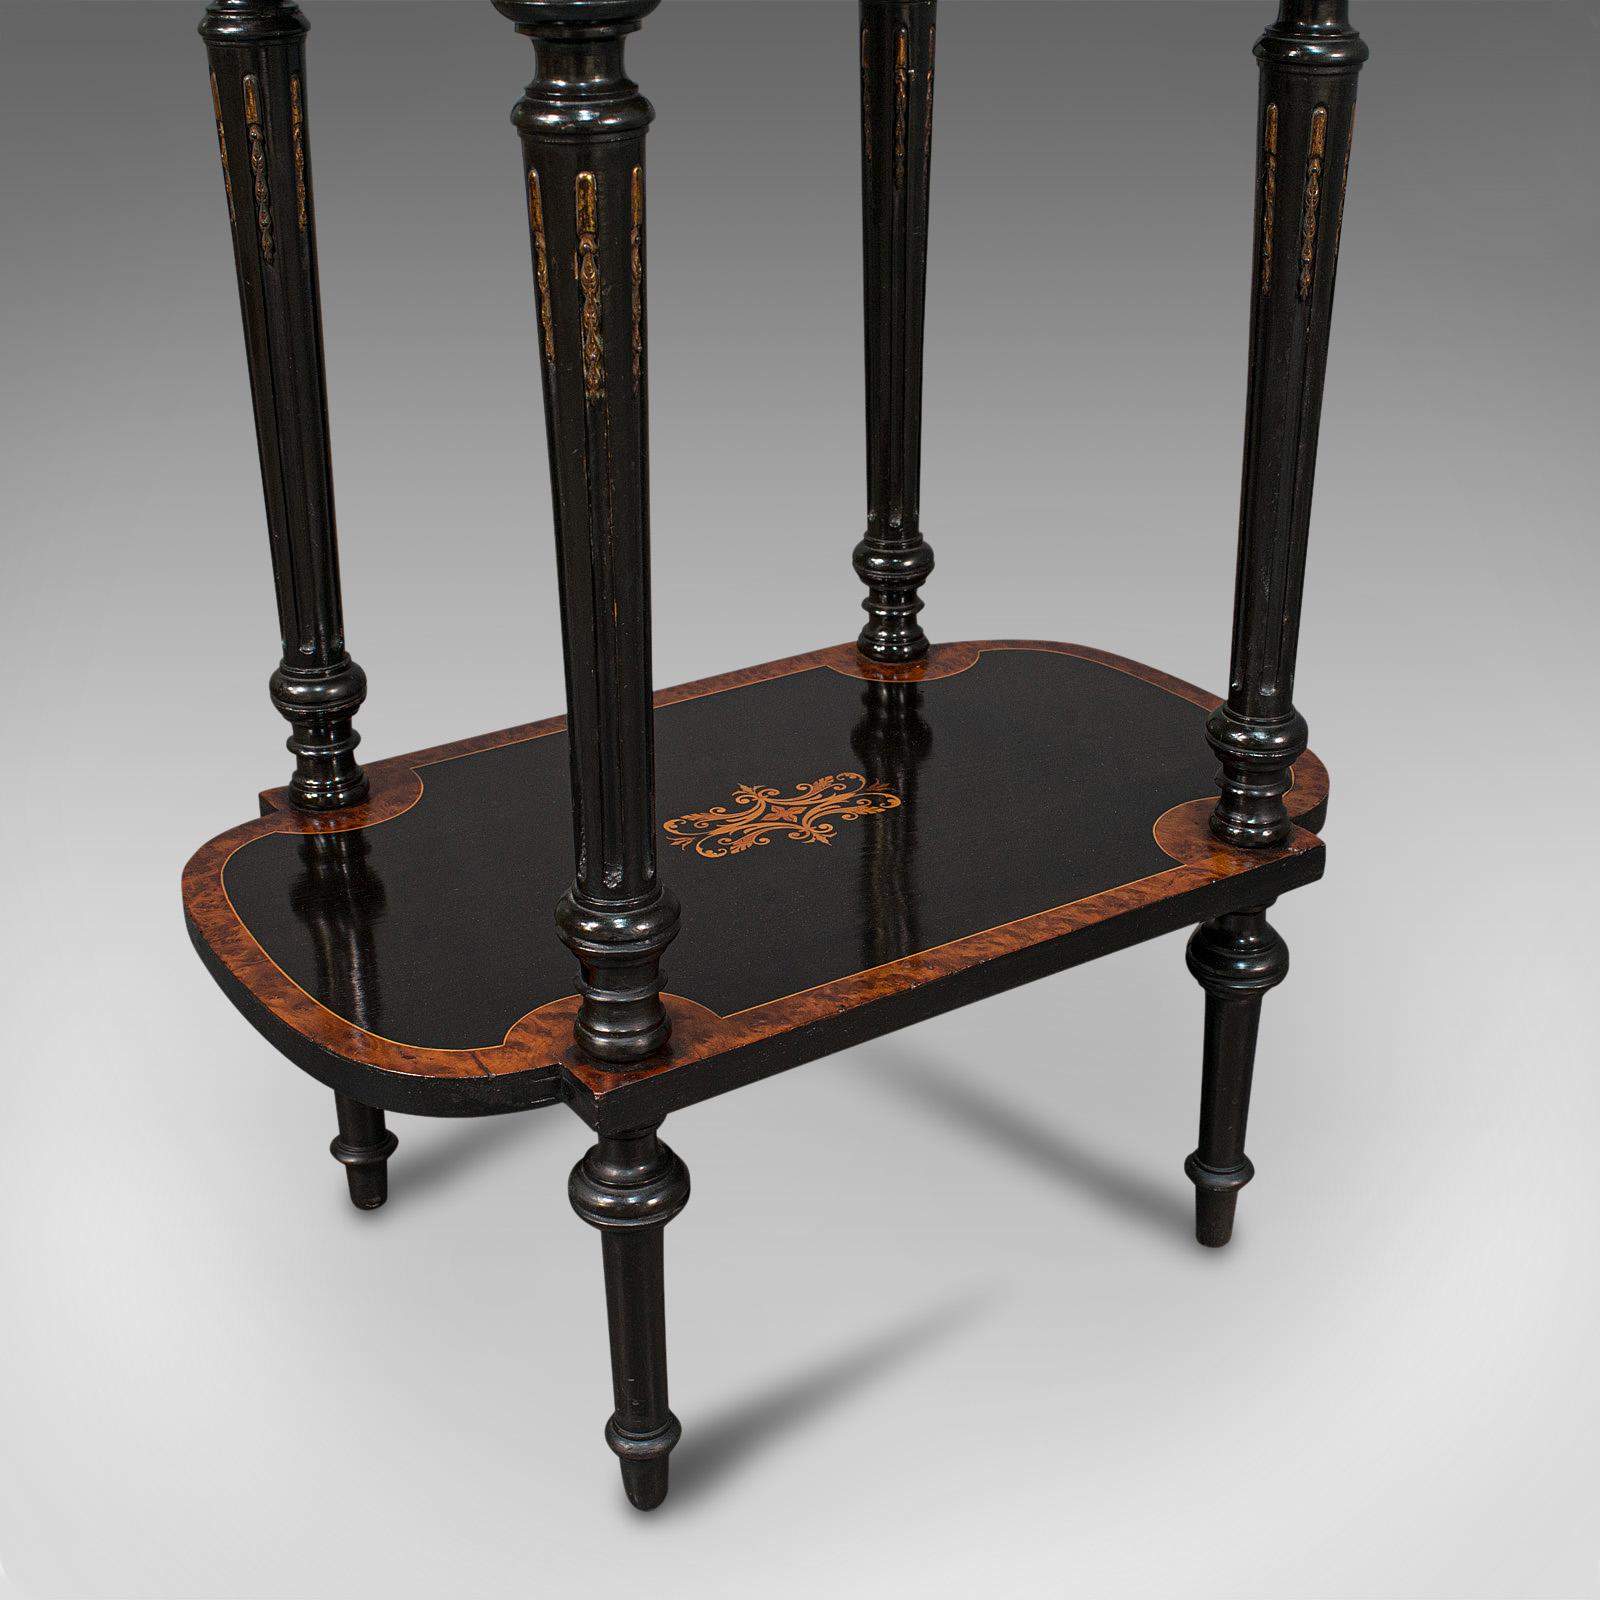 Antique Napoleon III Side Table, French, Etagere, Burr Walnut, Sewing, C.1870 8